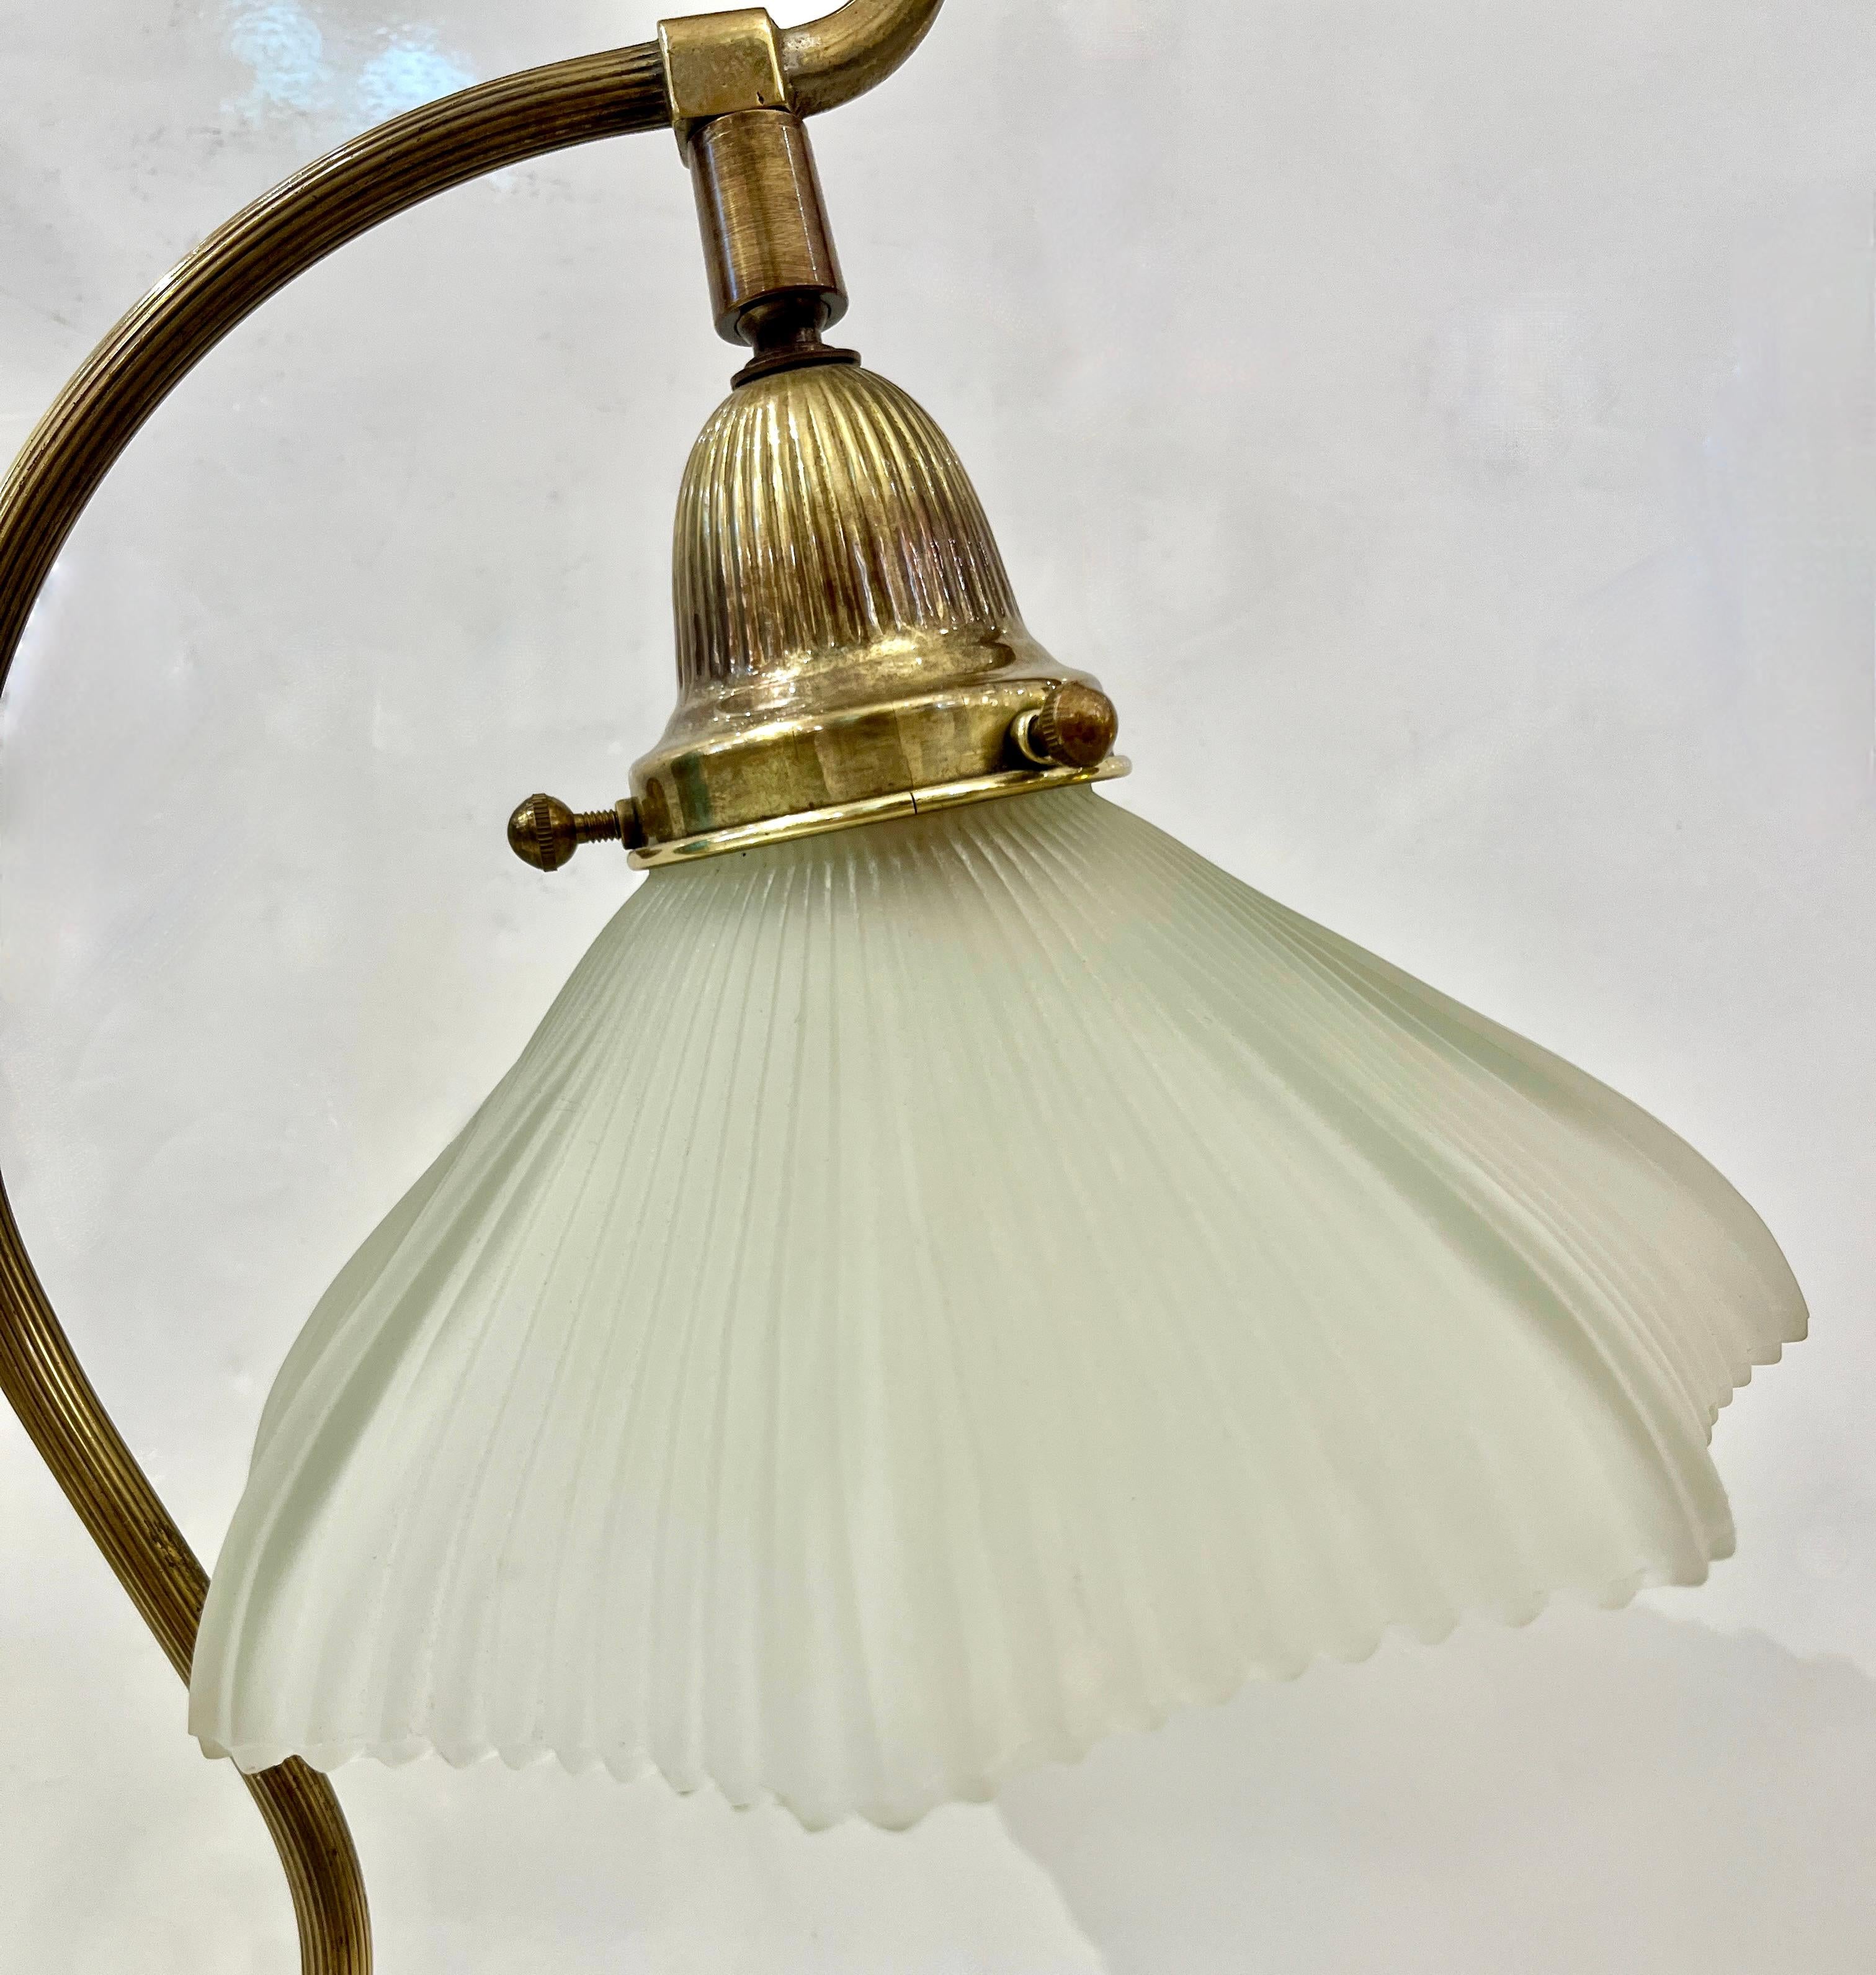 1950s American Art Deco Style Brass Table/Desk Lamp with Satin White Glass Shade For Sale 2